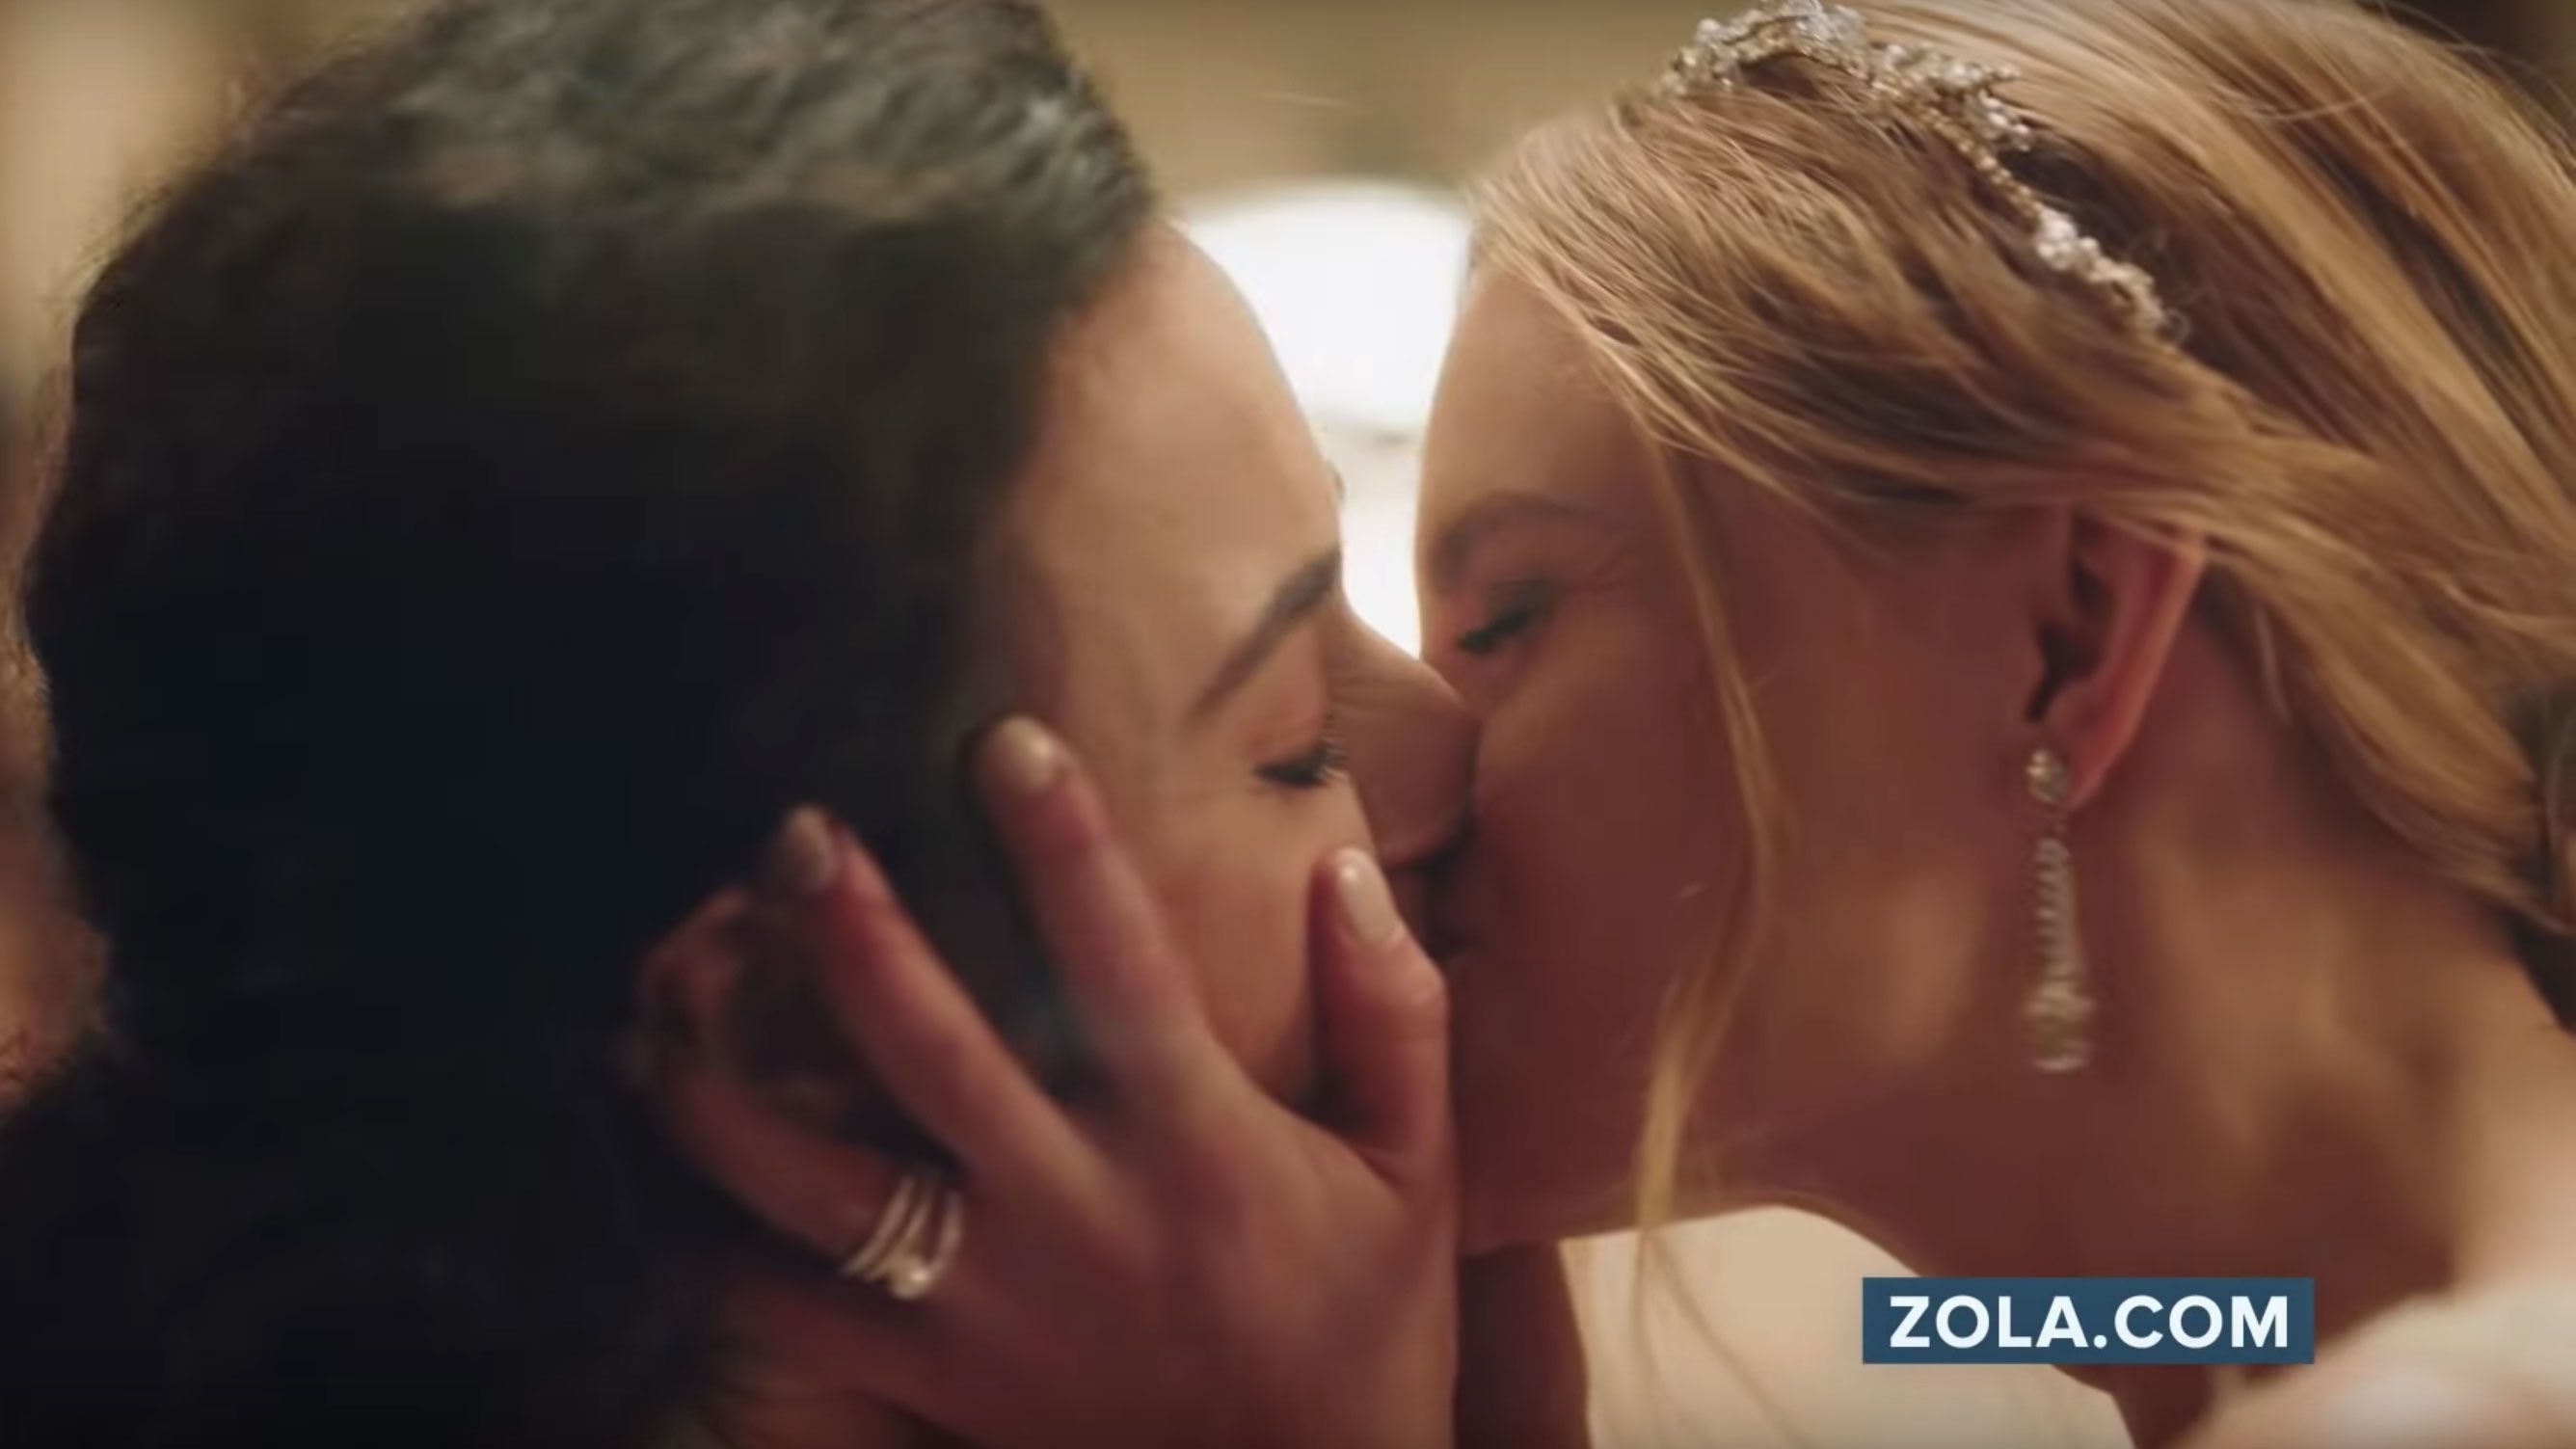 Free Lesbian Forced Blackmail Sex Videos - How gay couples in TV commercials became a mainstream phenomenon | CNN  Business